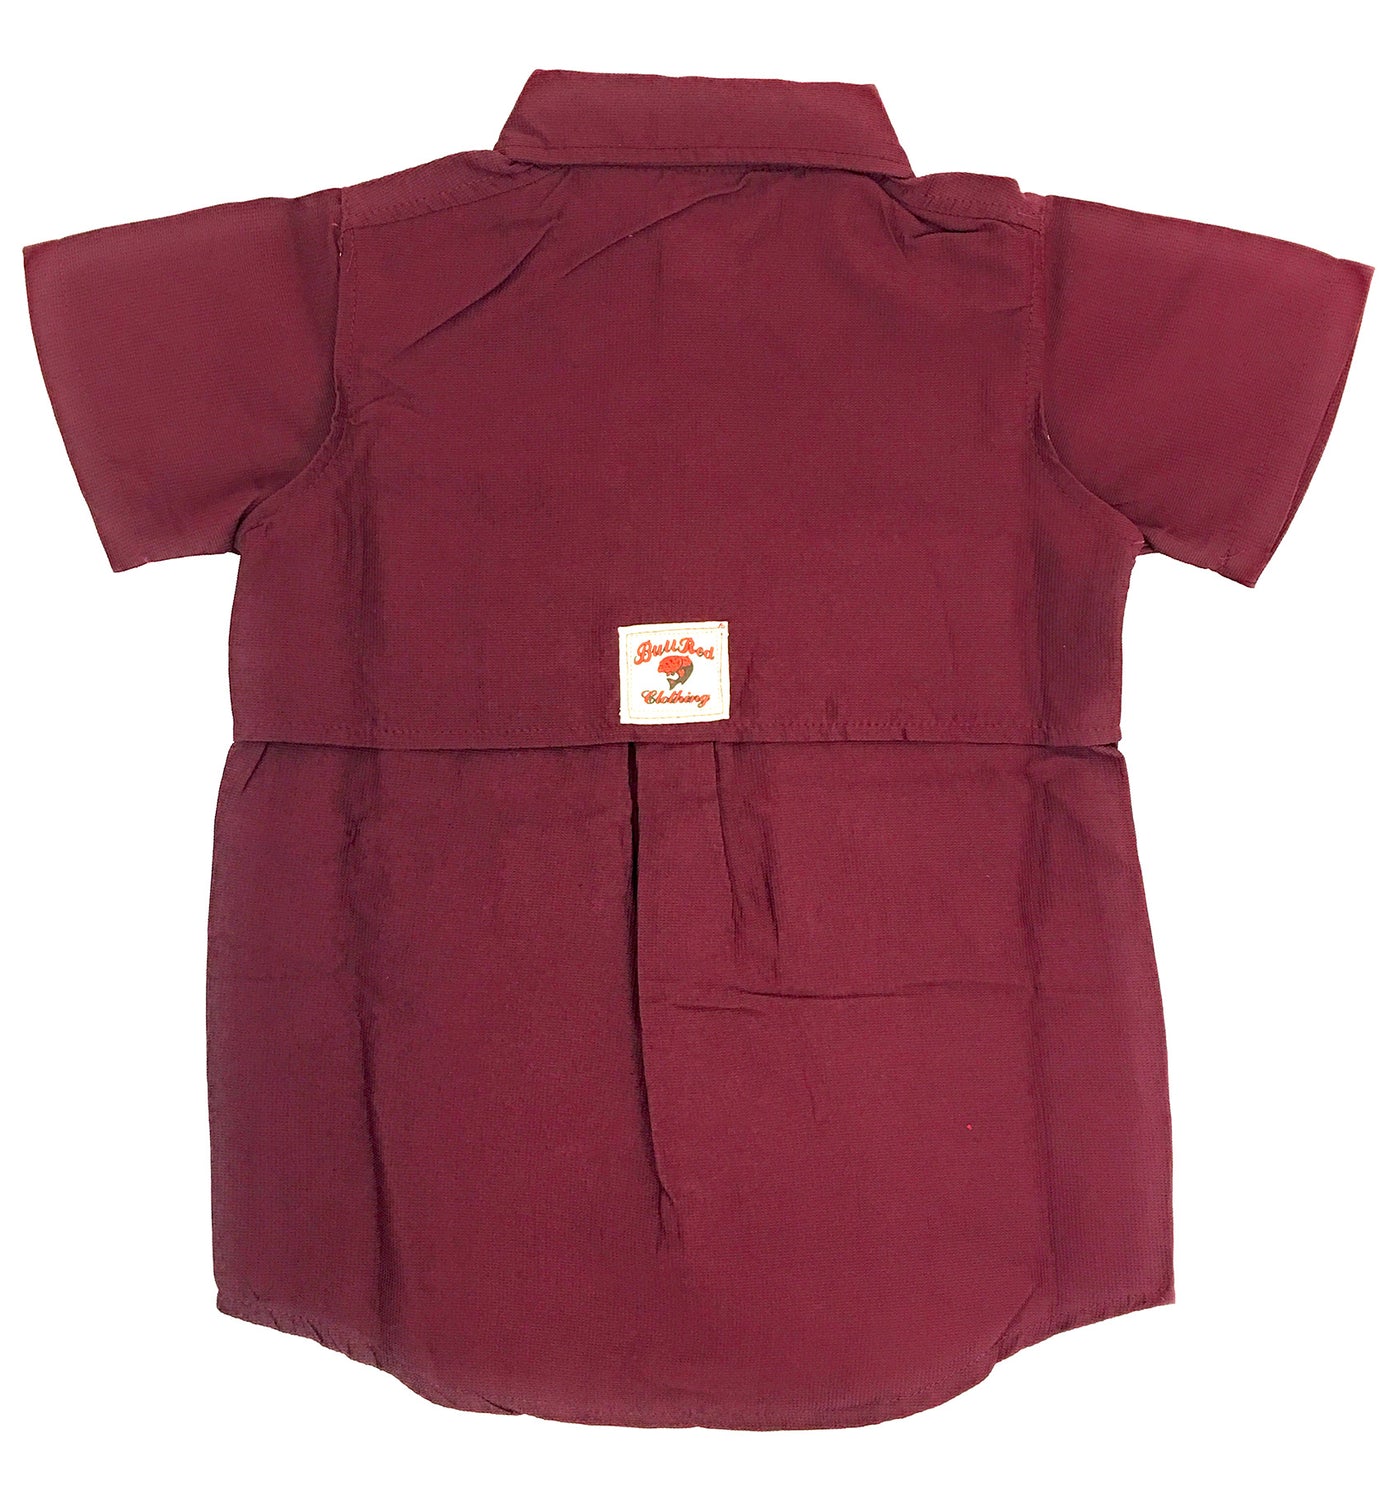 Fishing Tops & T-Shirts for Boys Sizes 2T-5T